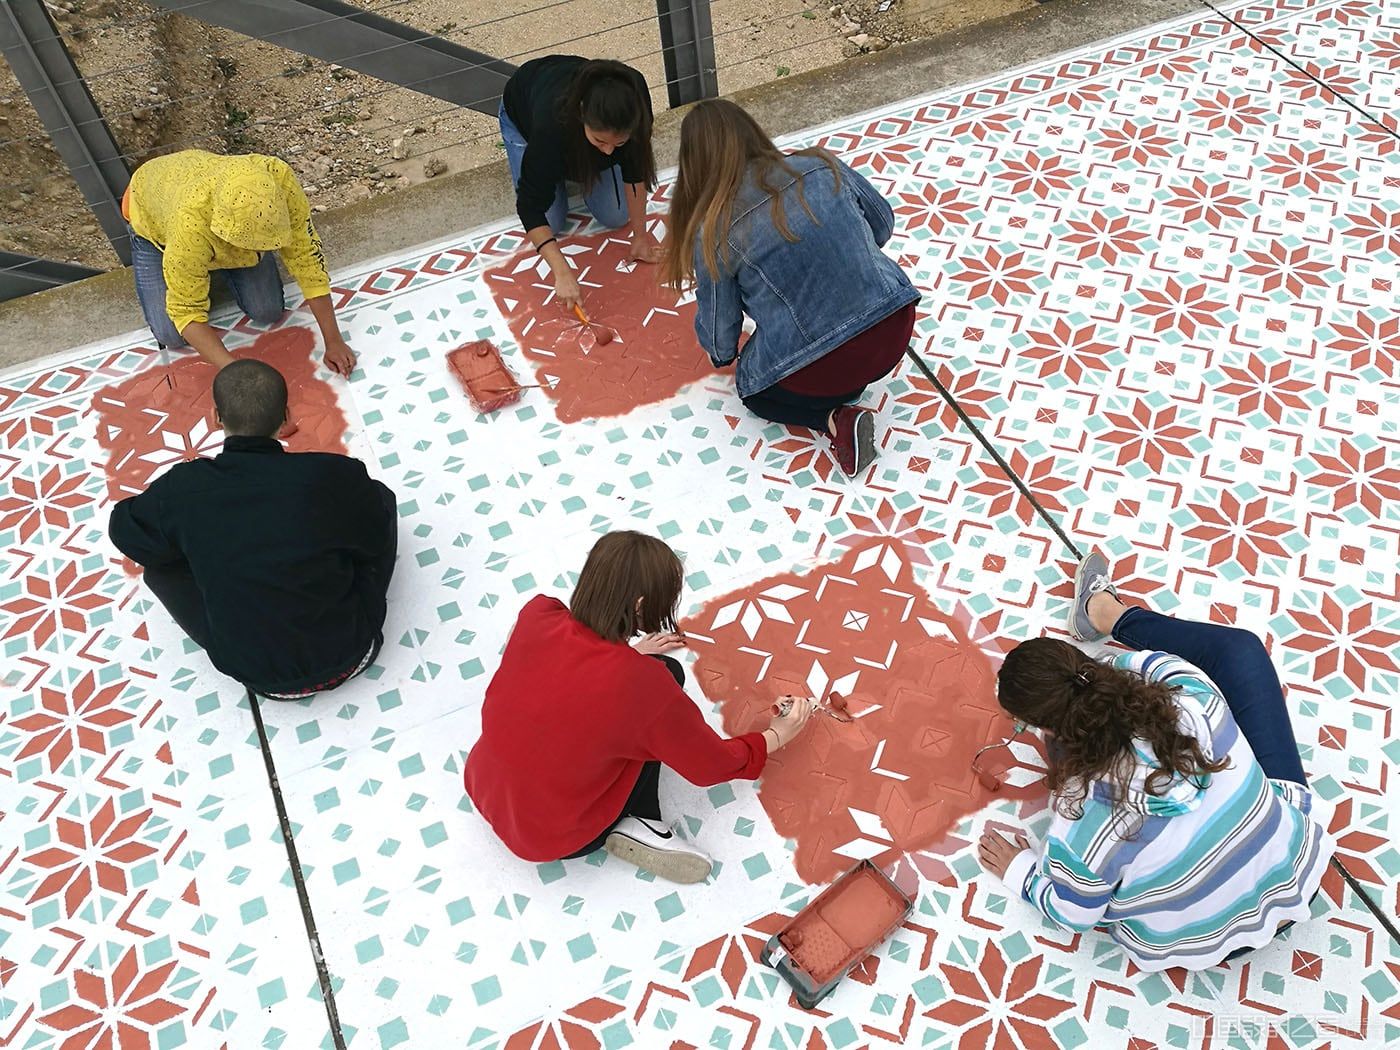 A photo of peopel painting a vibrant patterned rug-like intervention on the co<em></em>ncrete in a city